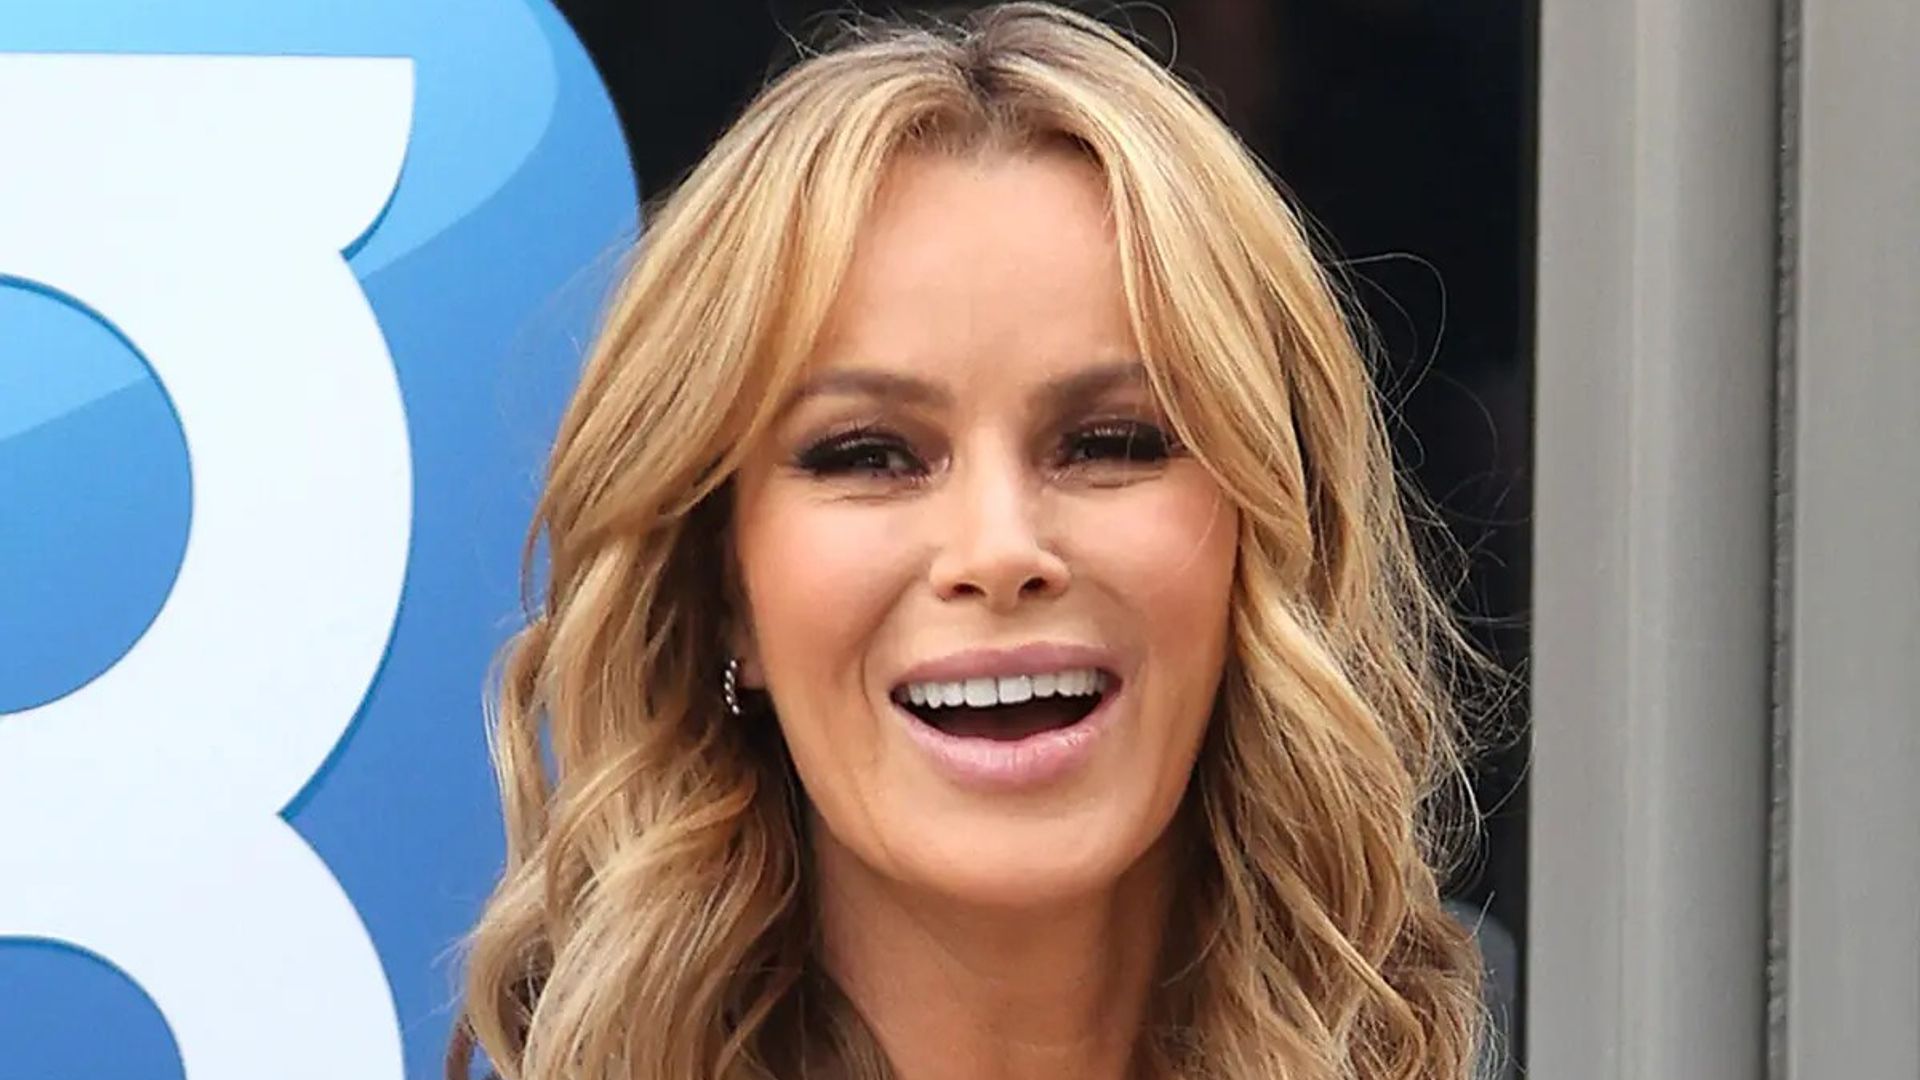 Amanda Holden wows fans in crop top and figure-hugging pencil skirt